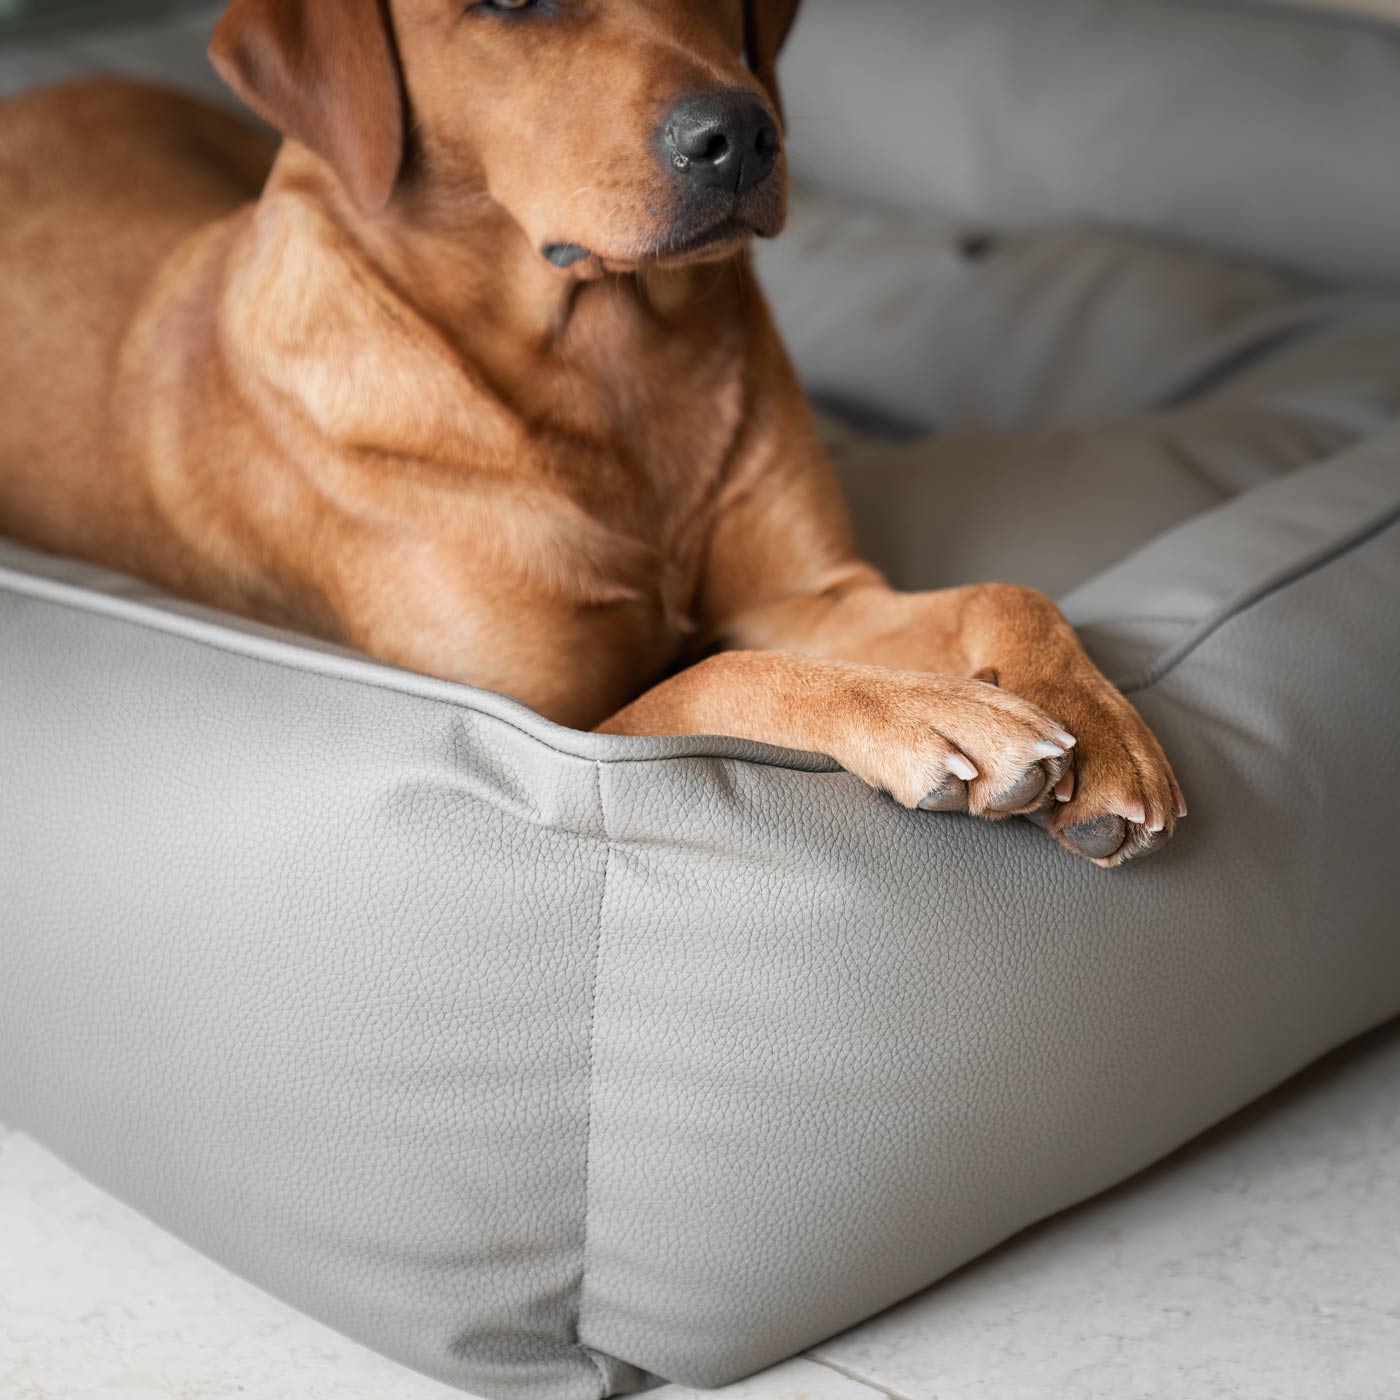 Luxury Handmade Box Bed in Rhino Tough Desert Faux Leather, in Camel, Perfect For Your Pets Nap Time! Available To Personalize at Lords & Labradors US